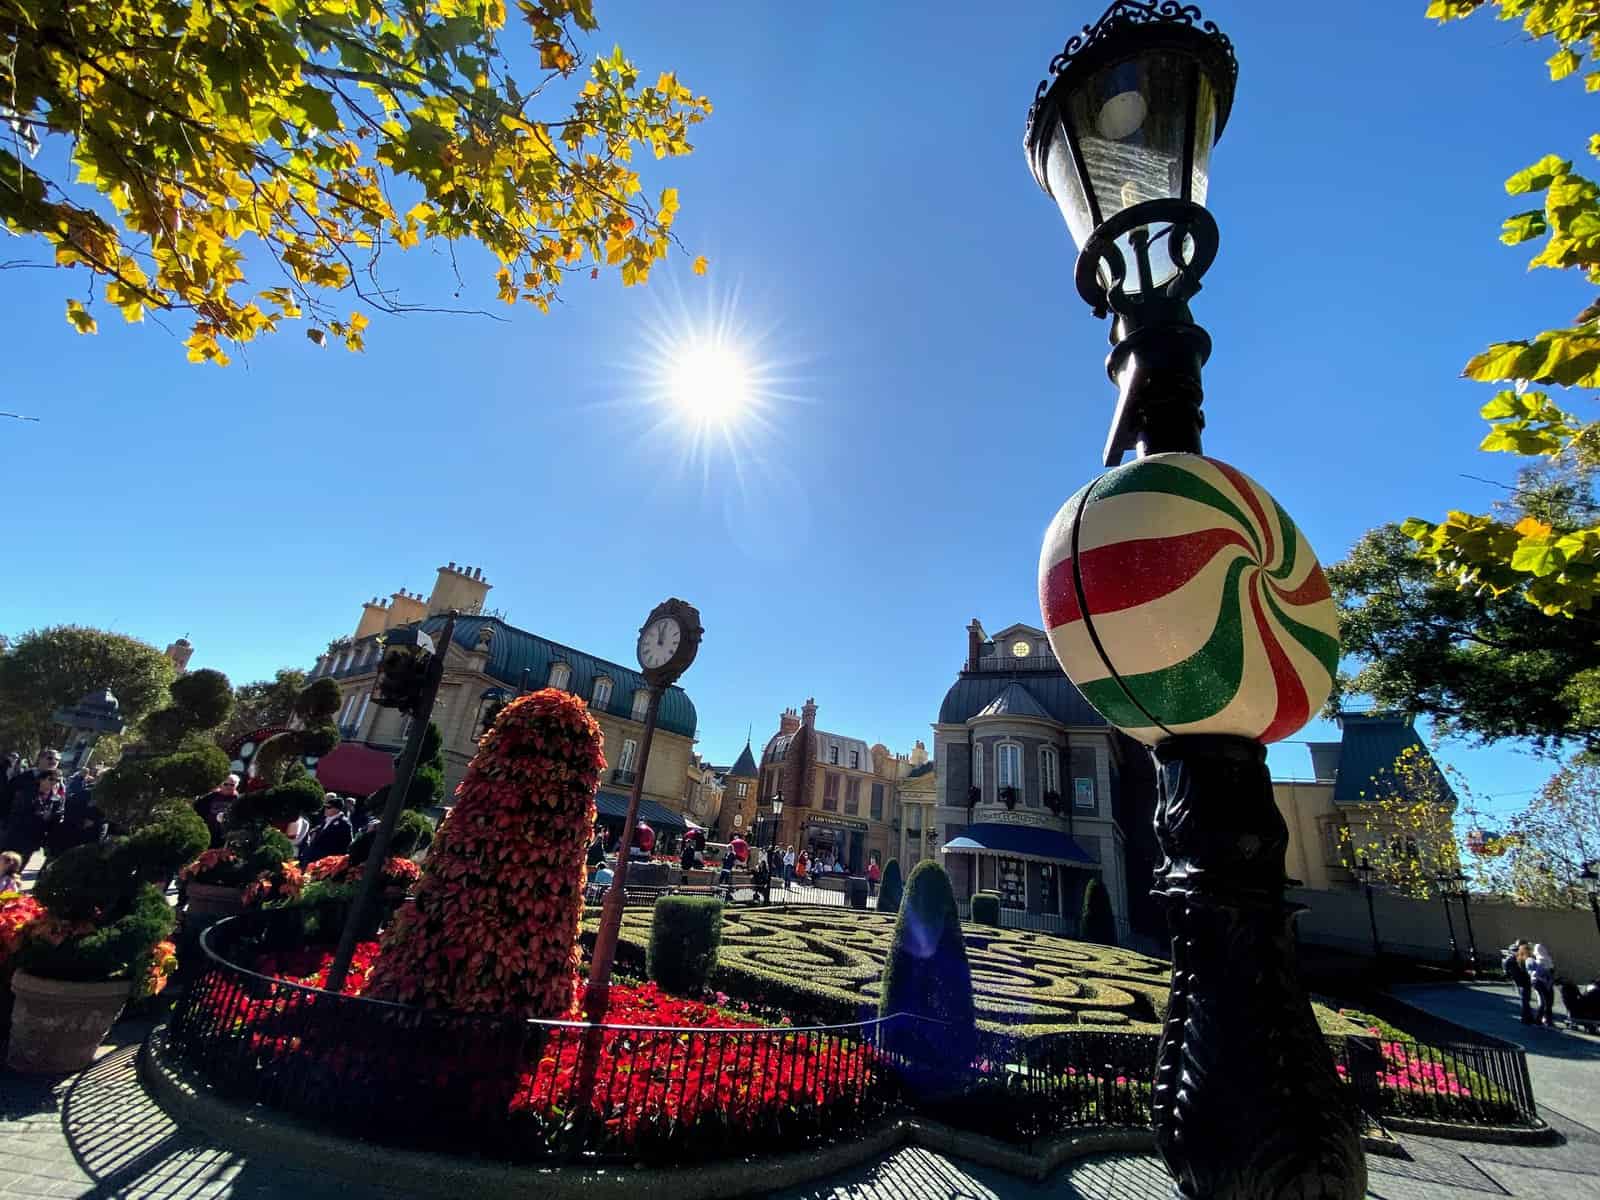 Overview of Epcot’s Festival of the Holidays for 2021